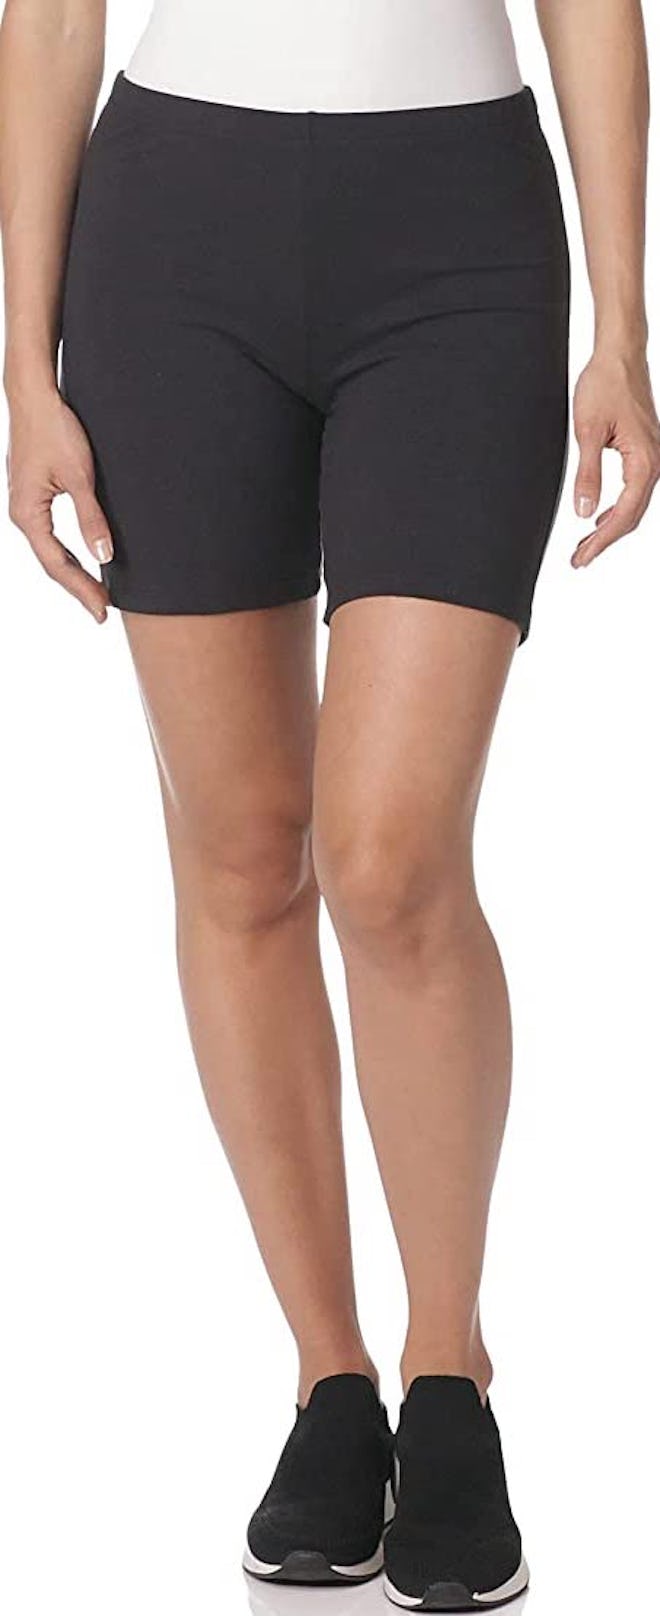 These Hanes bike shorts are budget-friendly and made from soft jersey material.